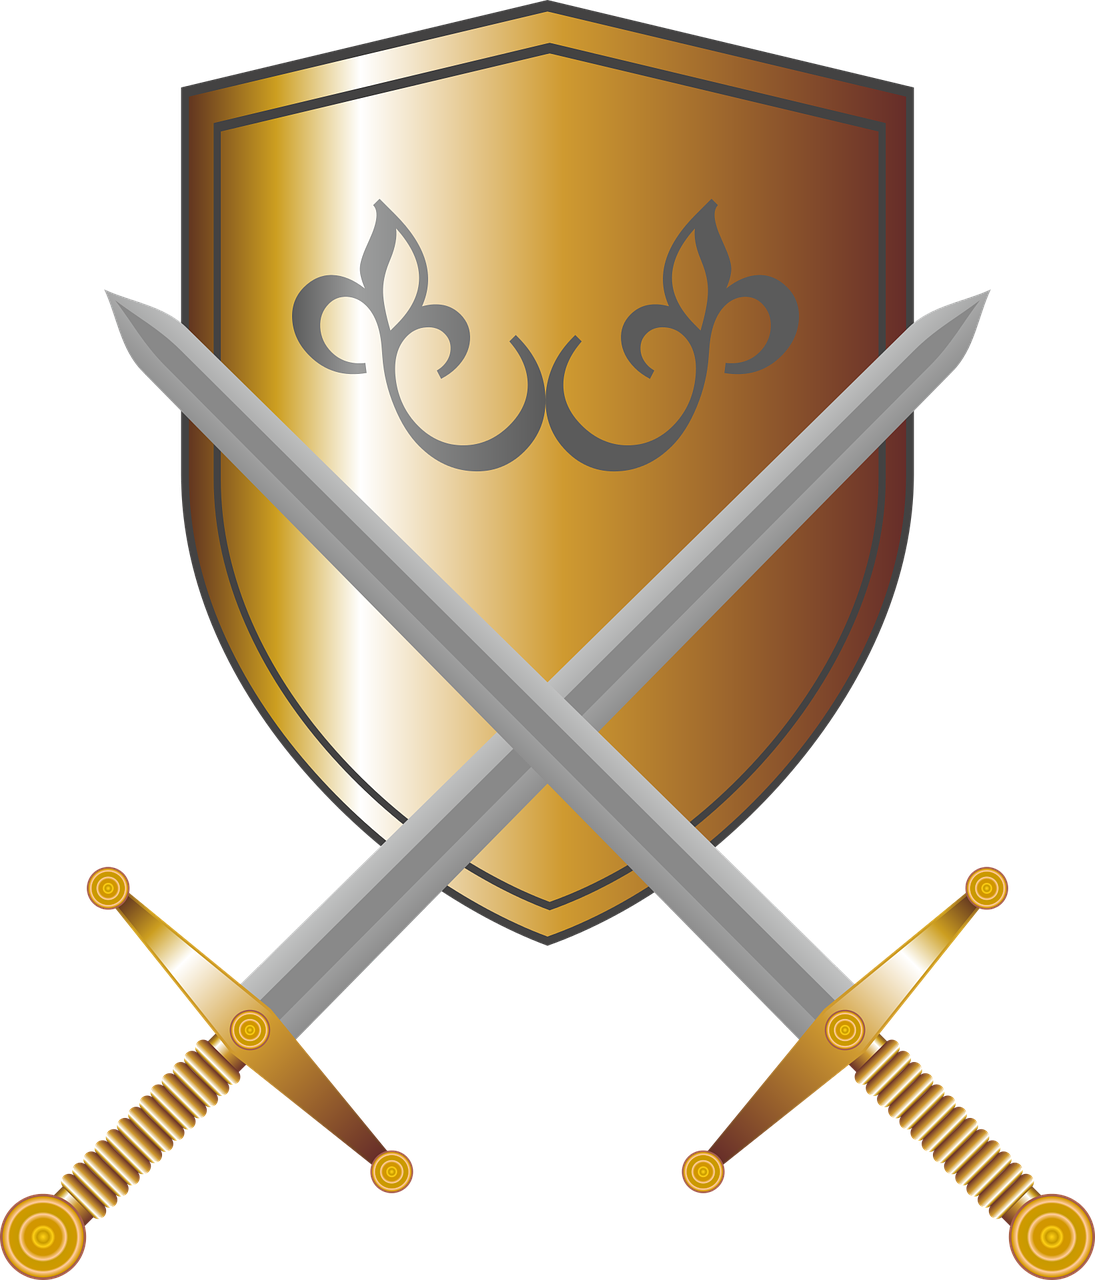 coat of arms shield swords free photo